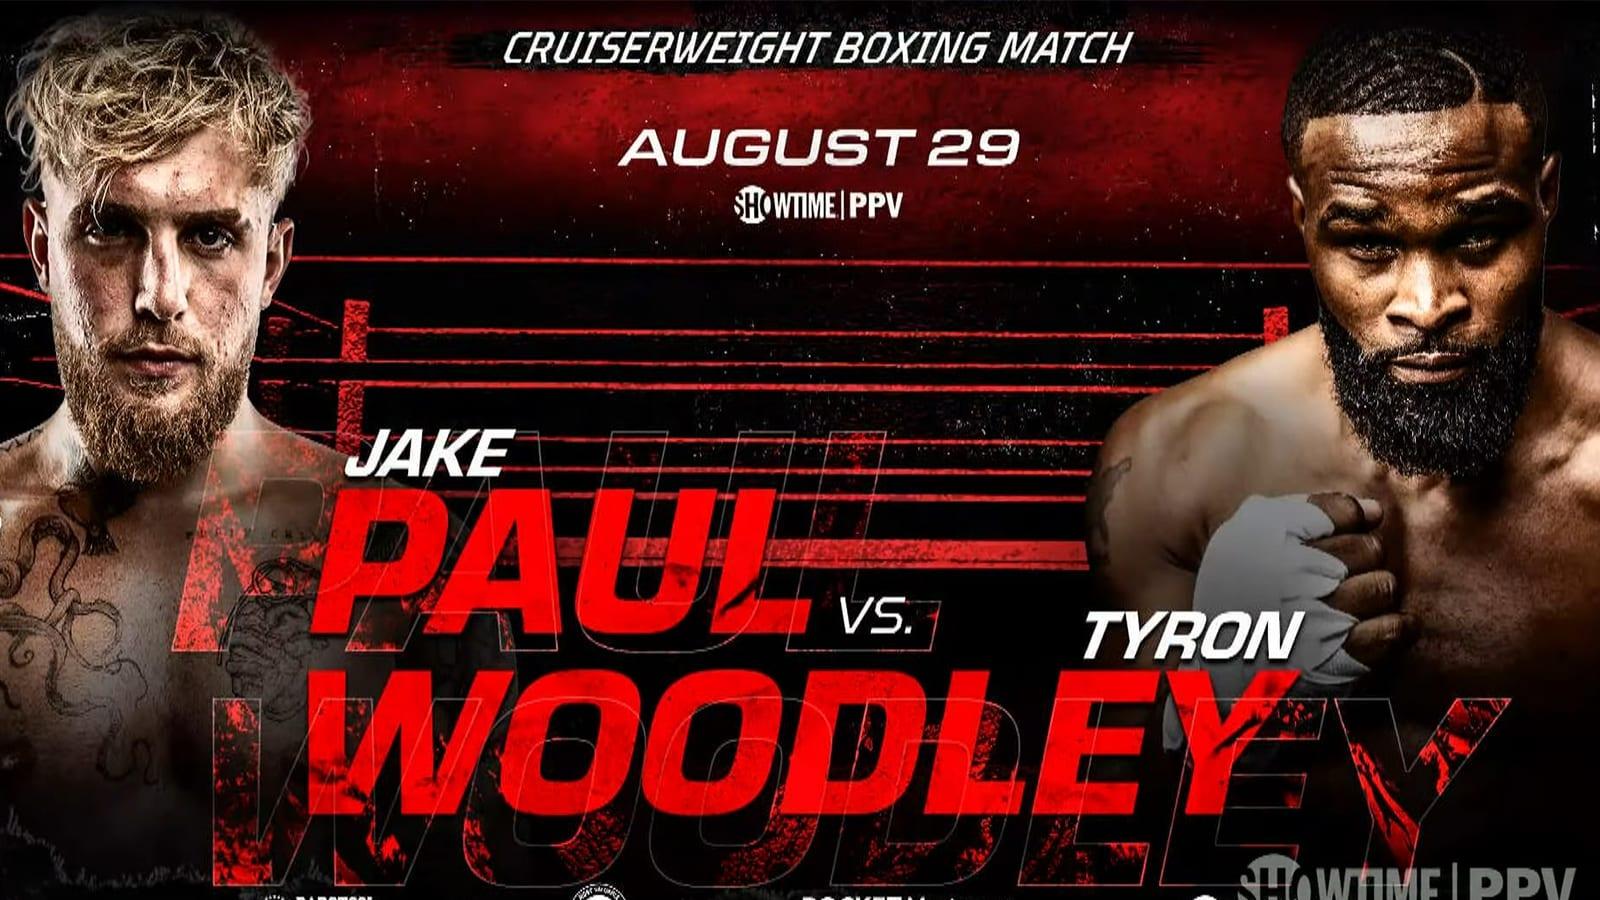 Promotional image for Paul vs Woodley fight